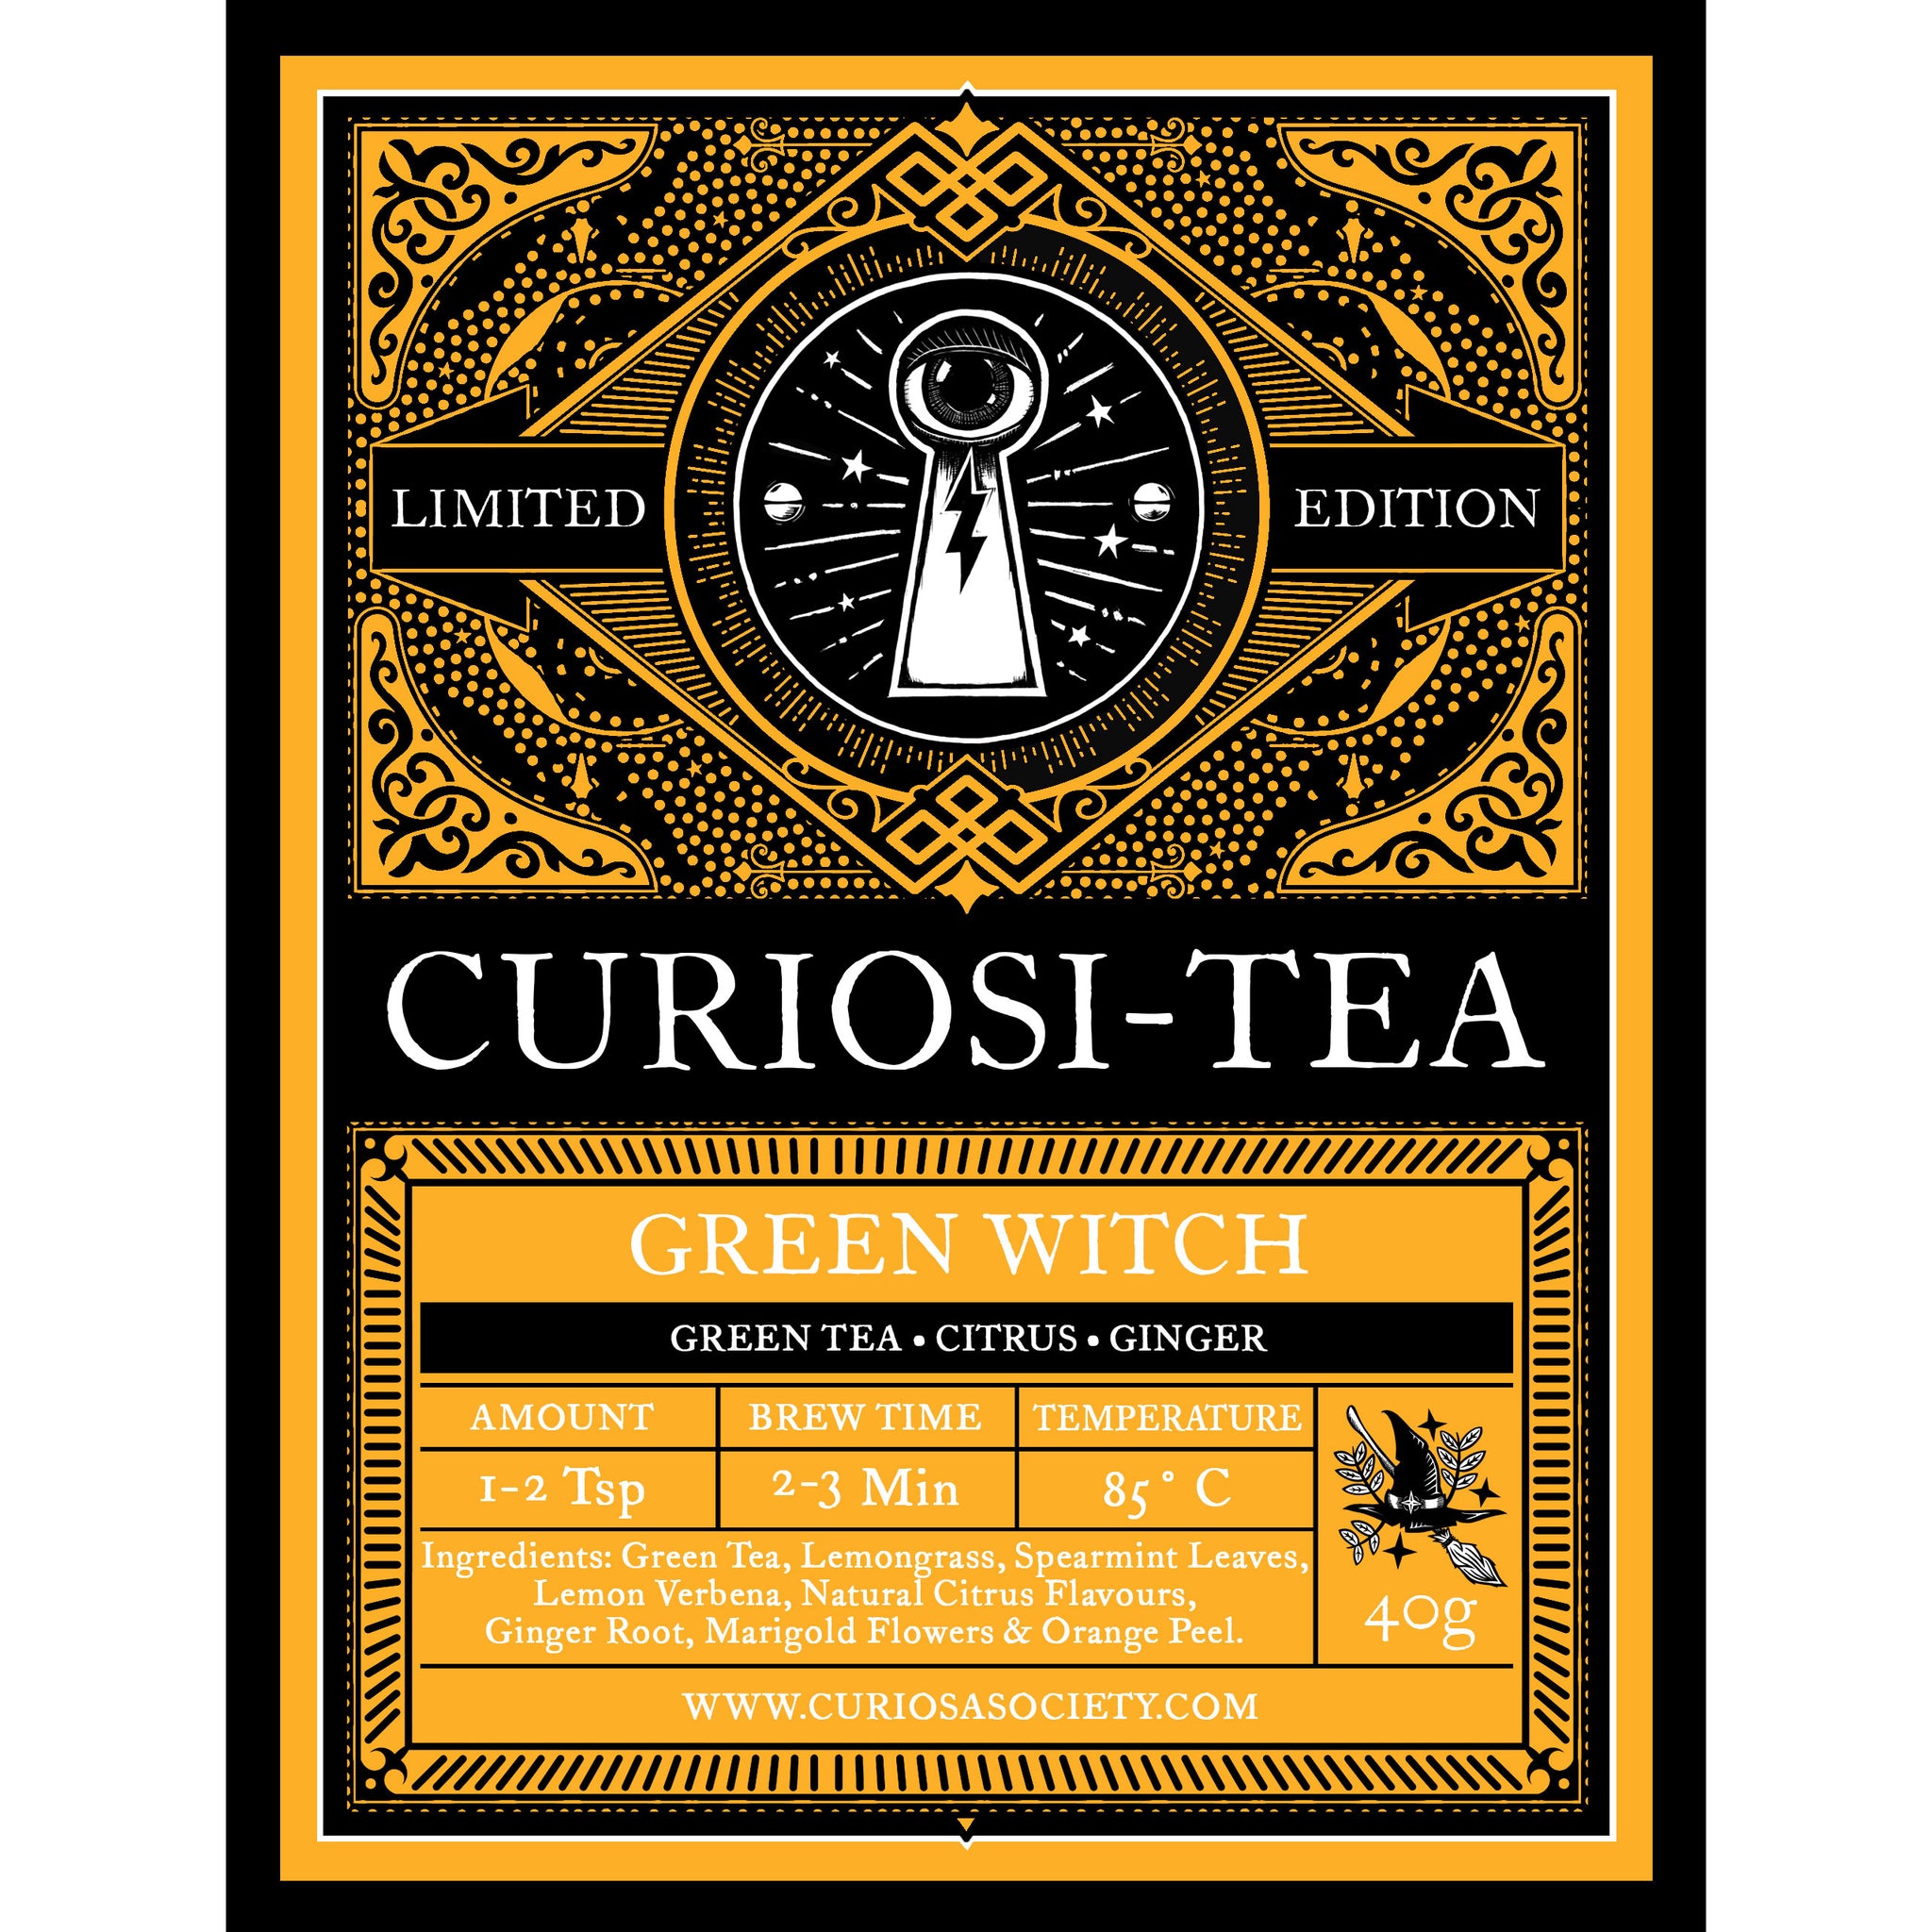 Green Witch Limited Edition Curiosi-tea